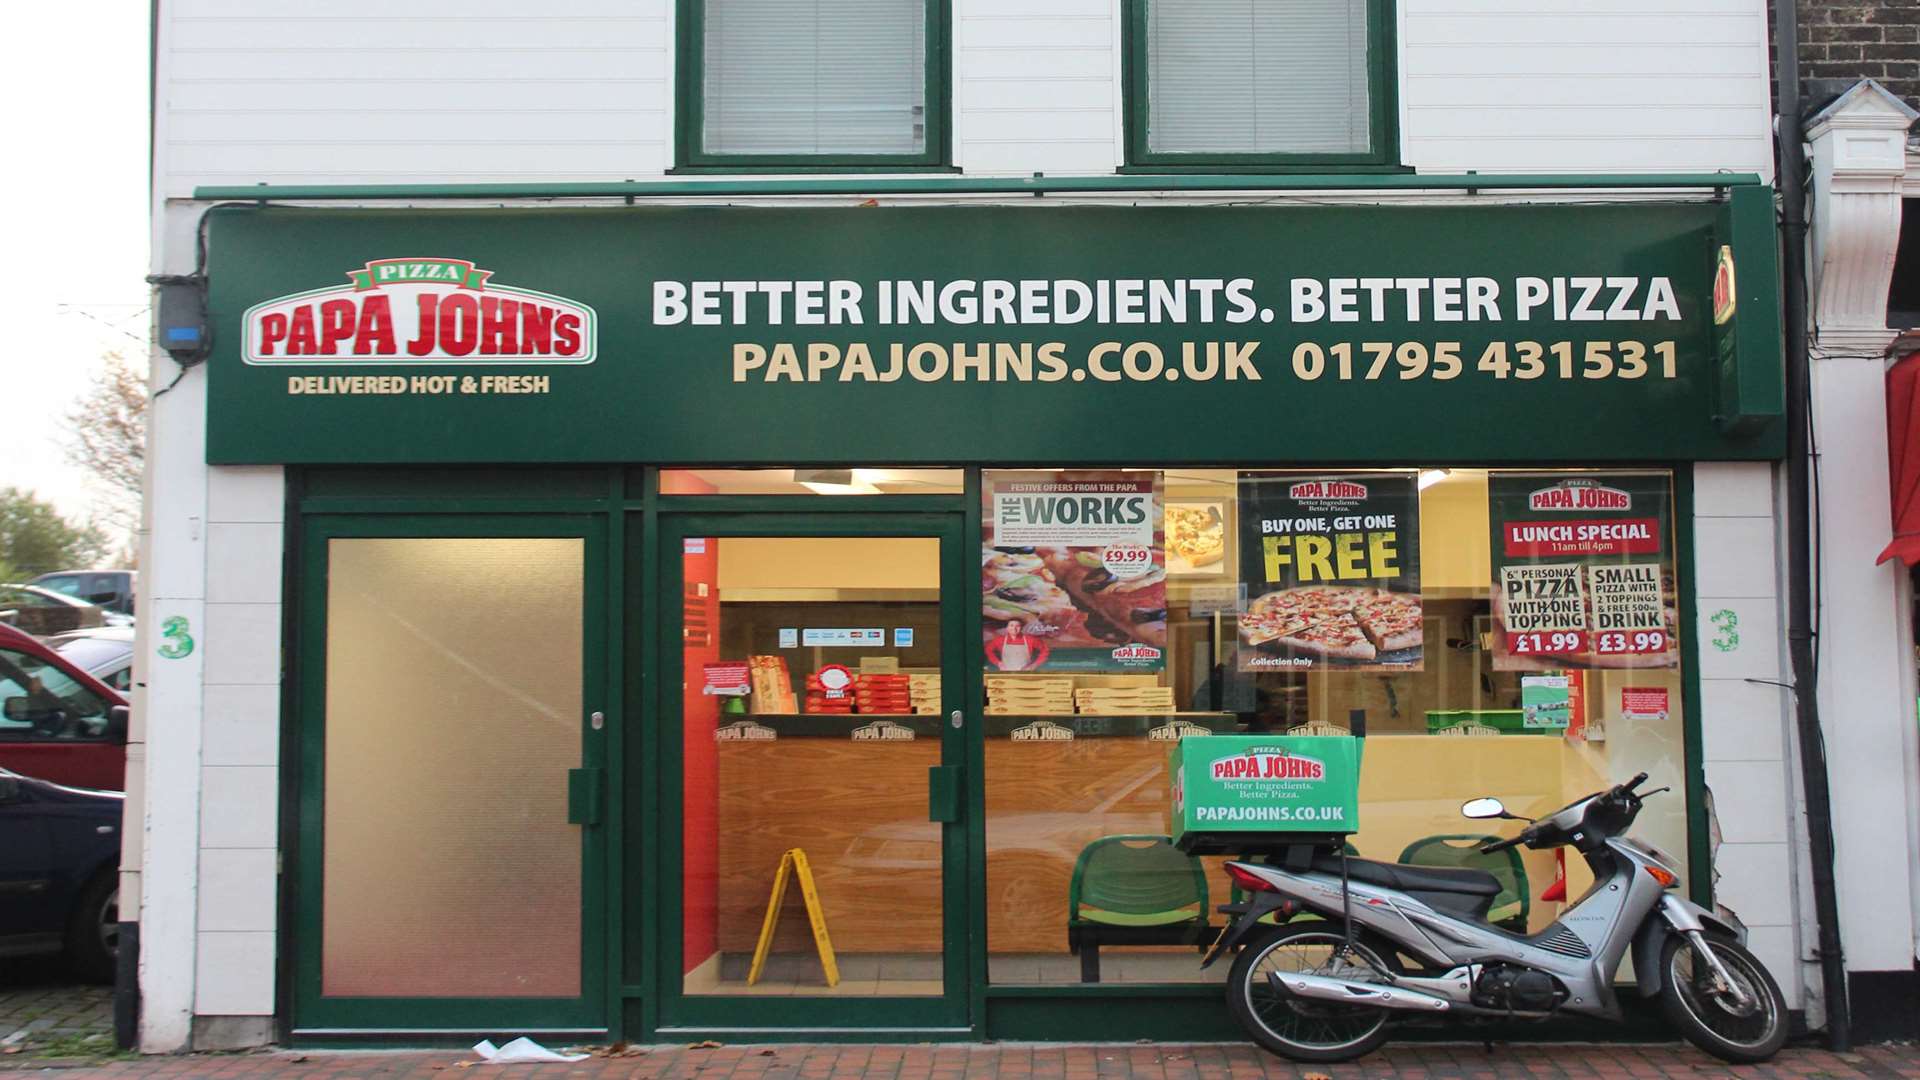 Papa John's in Sittingbourne has been linked with a change to halal meat after rumours spread on Facebook